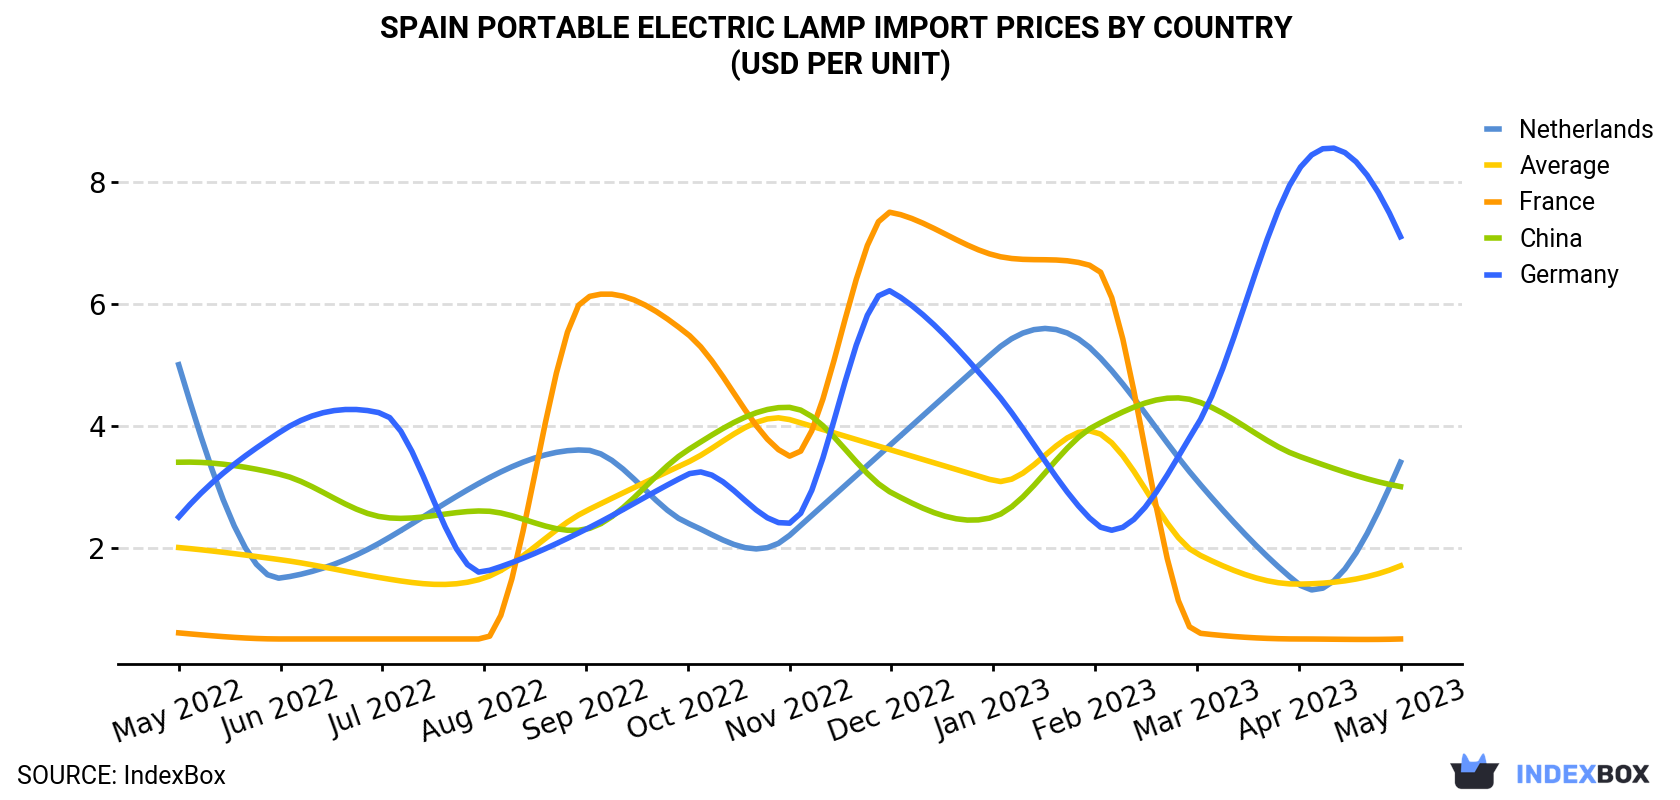 Spain Portable Electric Lamp Import Prices By Country (USD Per Unit)